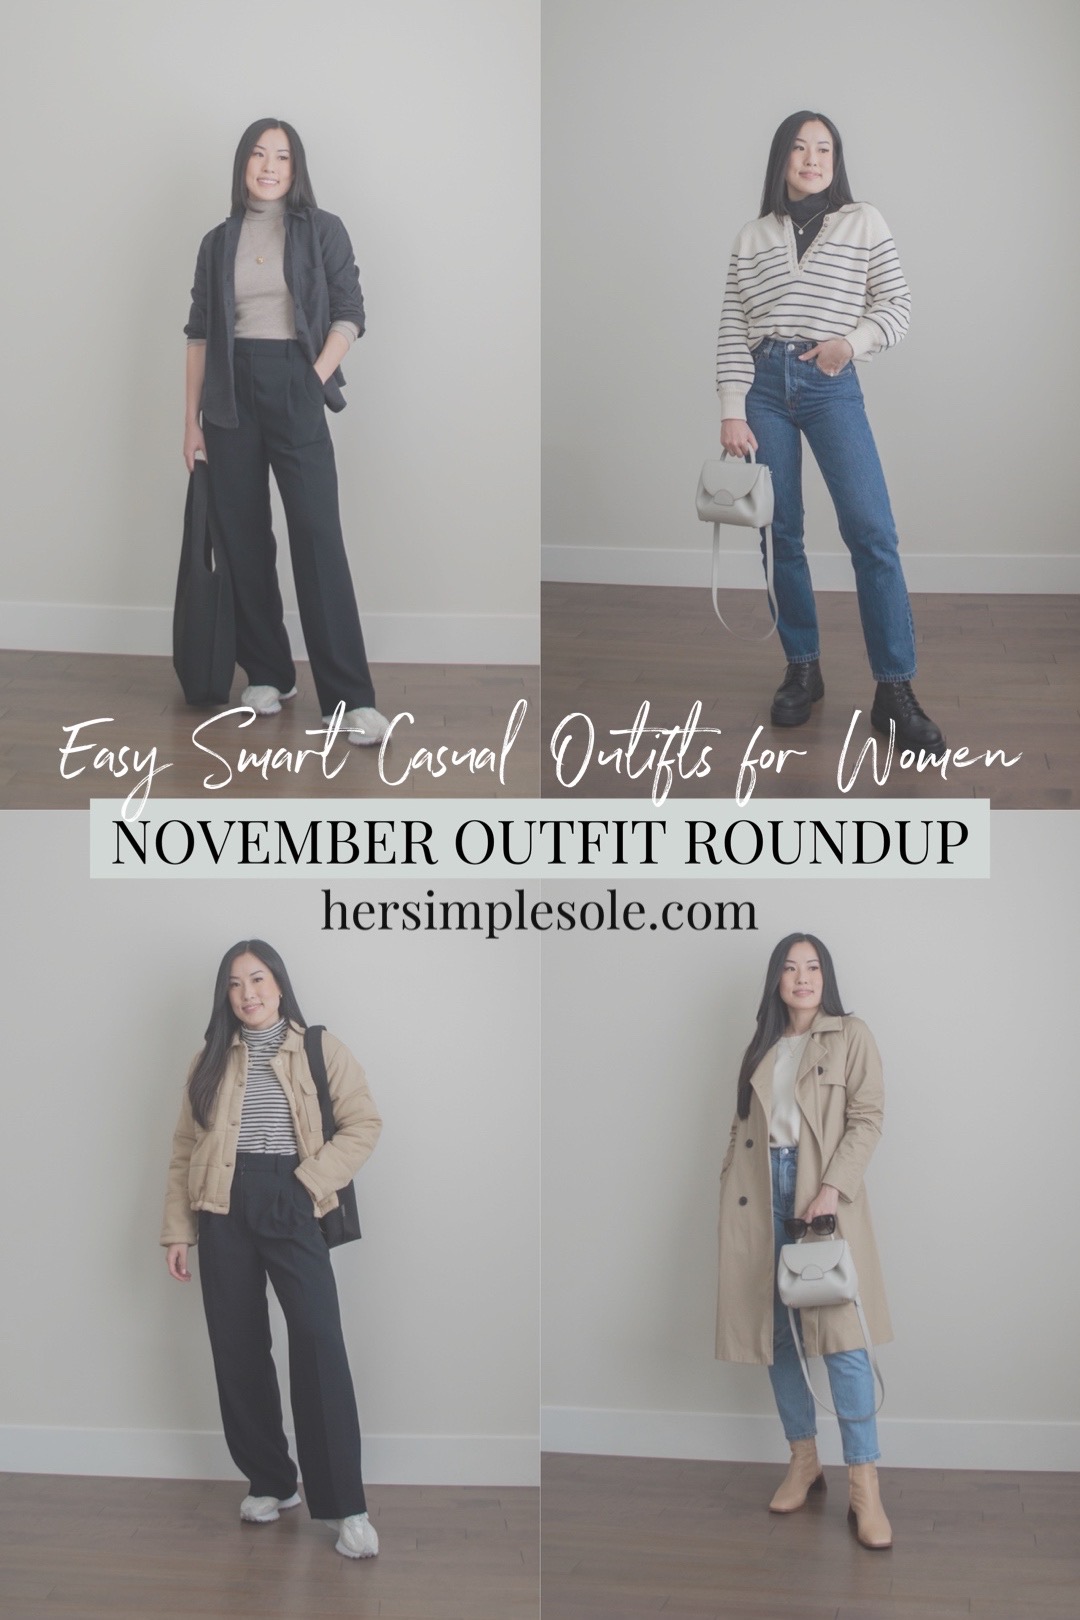 Easy Smart Casual Outfits for Women - November Outfit Roundup